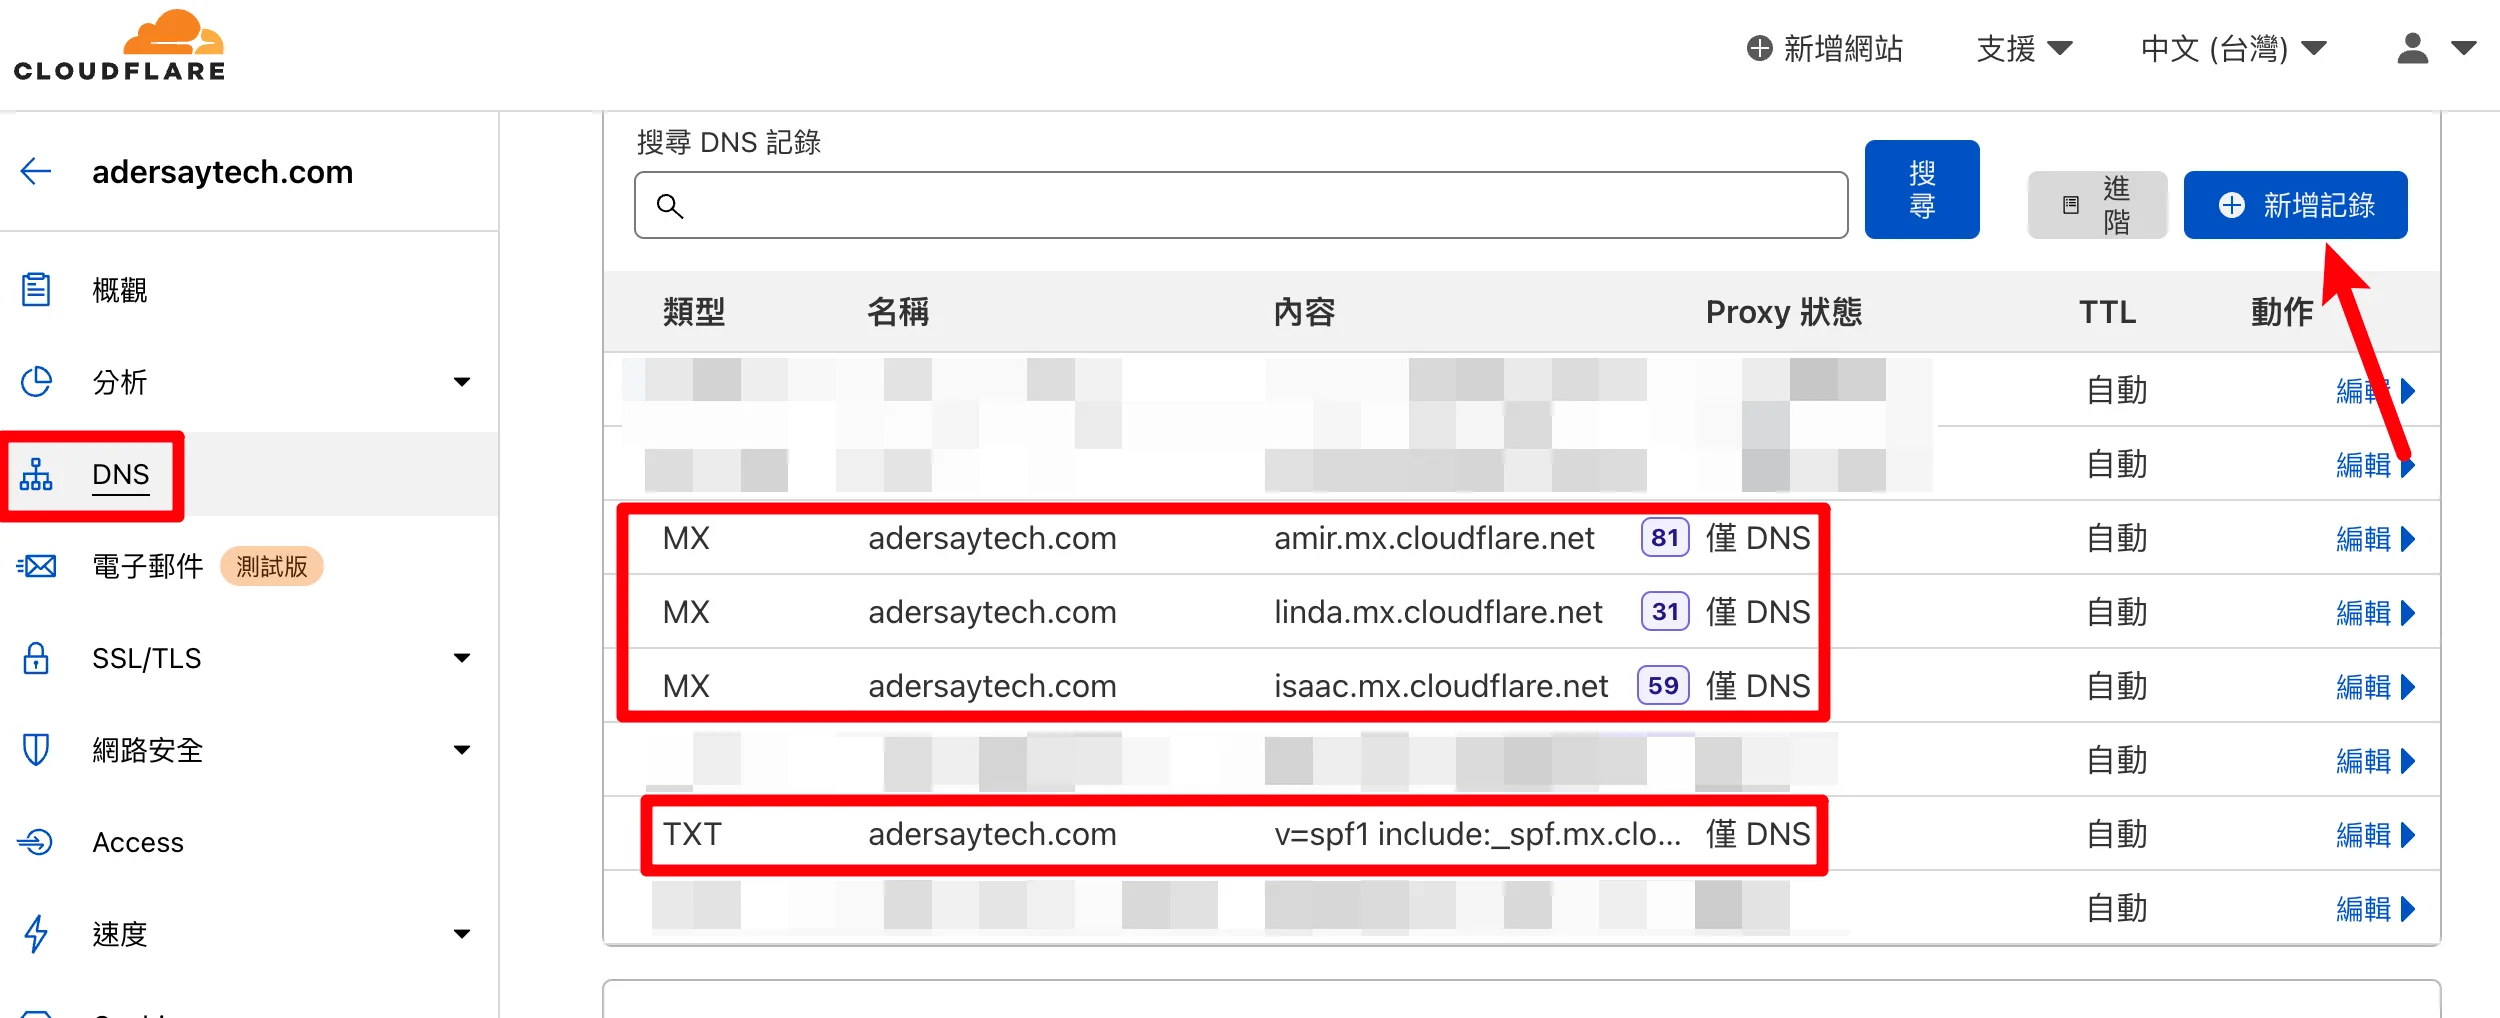 Cloudflare Email Routing 電子郵件路由，可免費自訂網域信箱！ 27